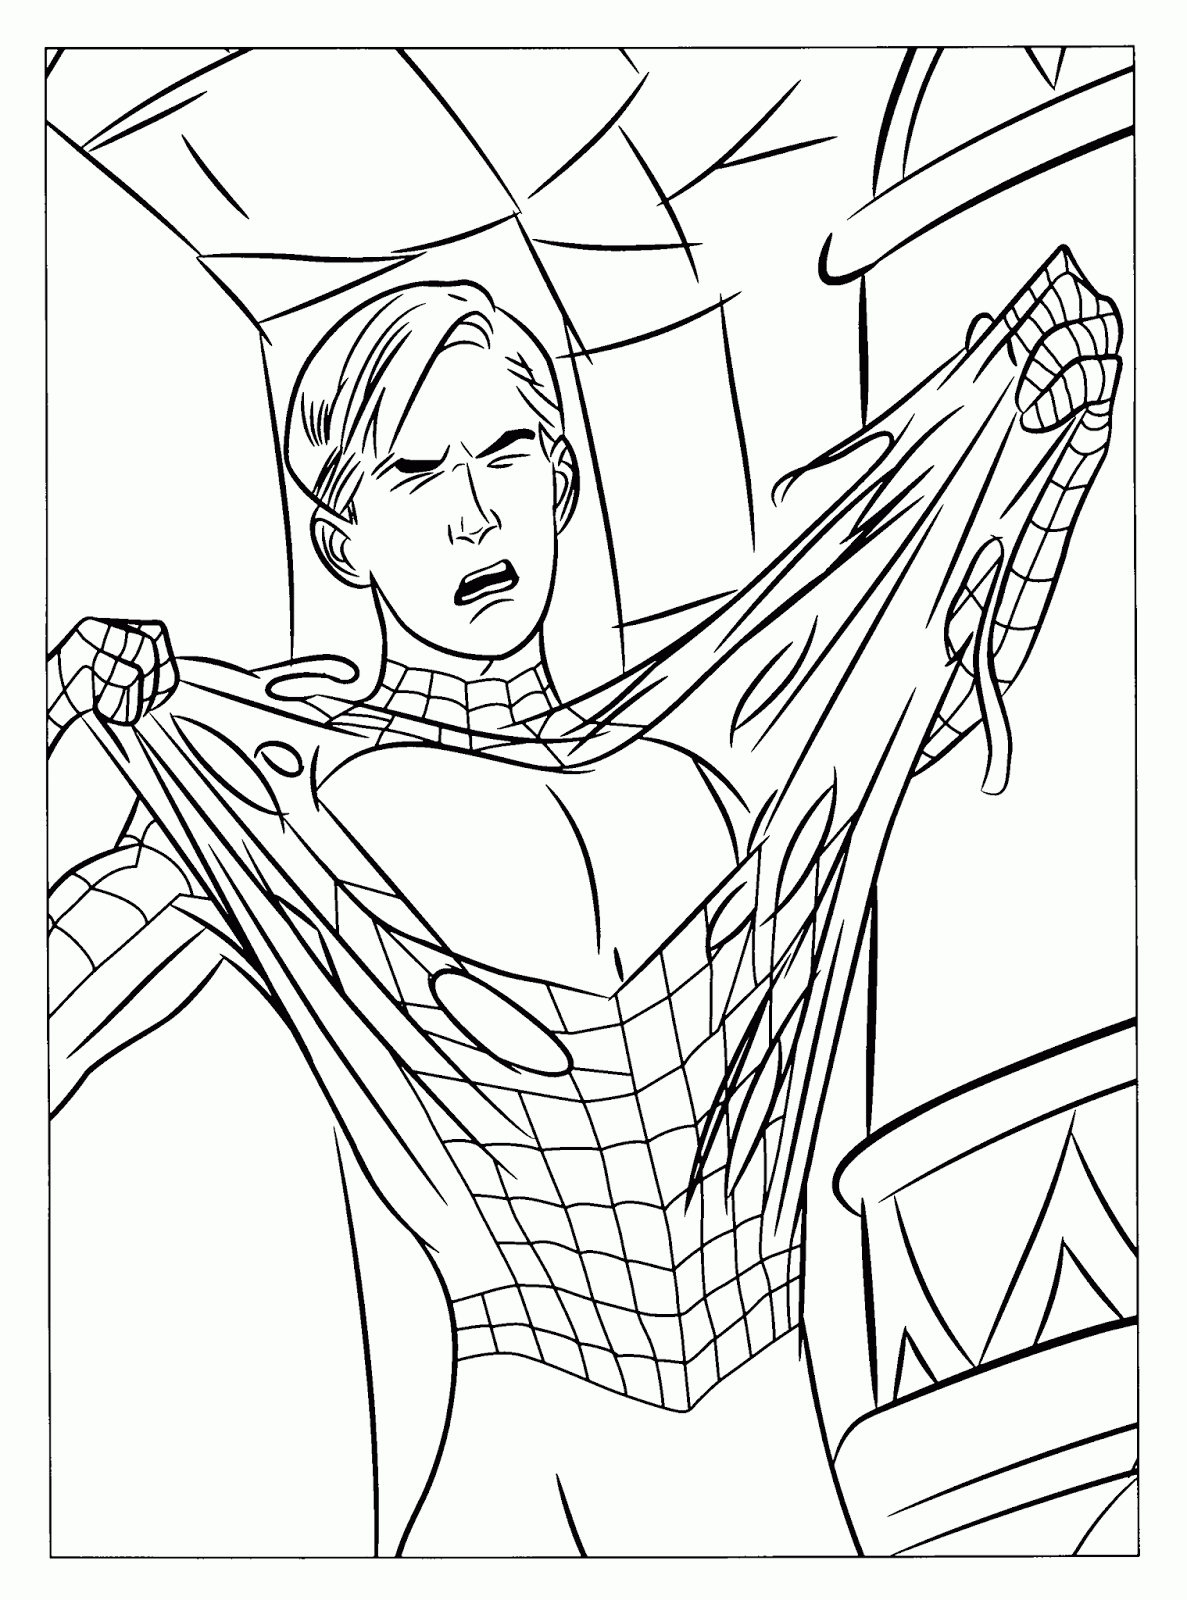 Coloring Pages: Spiderman Free Printable Coloring Pages